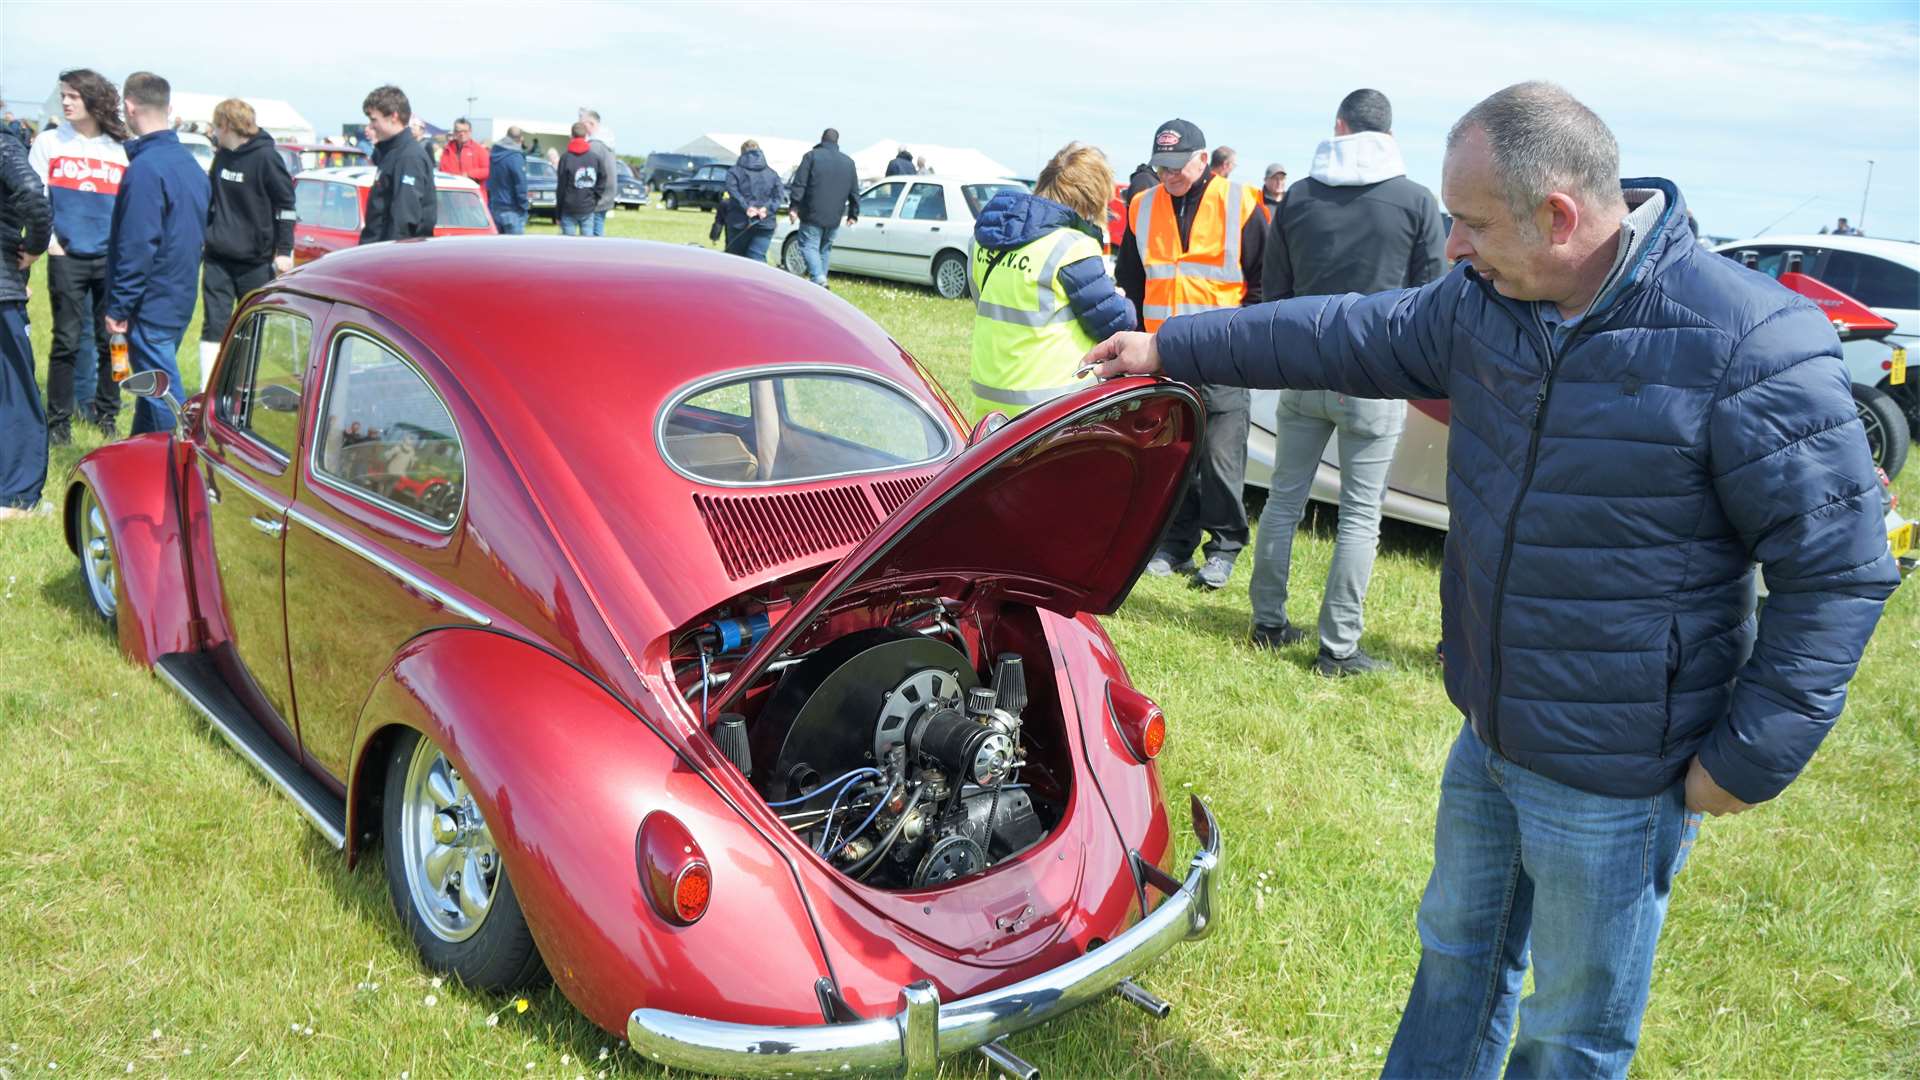 Justin Kirby from Wick with his custom 1957 VW Beetle. Justin won top award in Class H – Modified Custom Vehicles Pre 1996 Picture: DGS